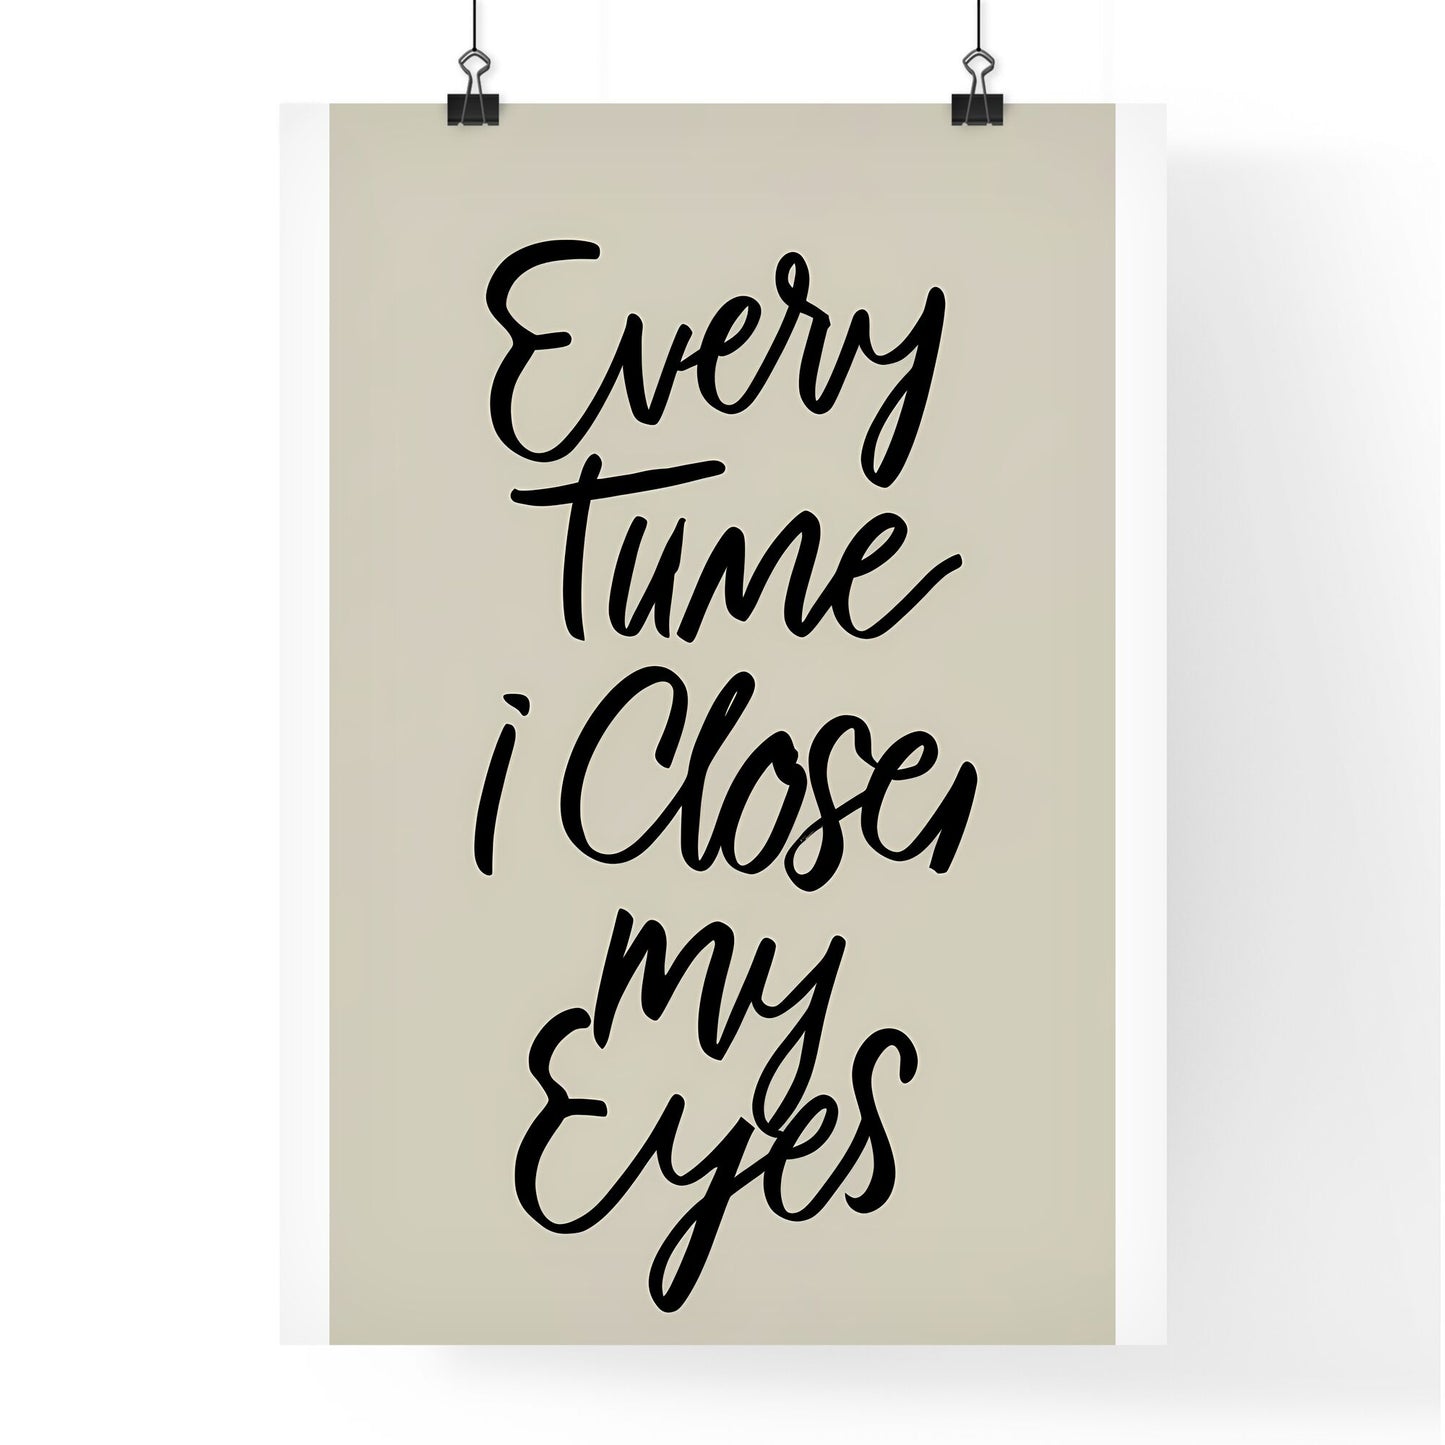 Every Time I Close My Eyes - A White Sign With Black Text Art Print Default Title